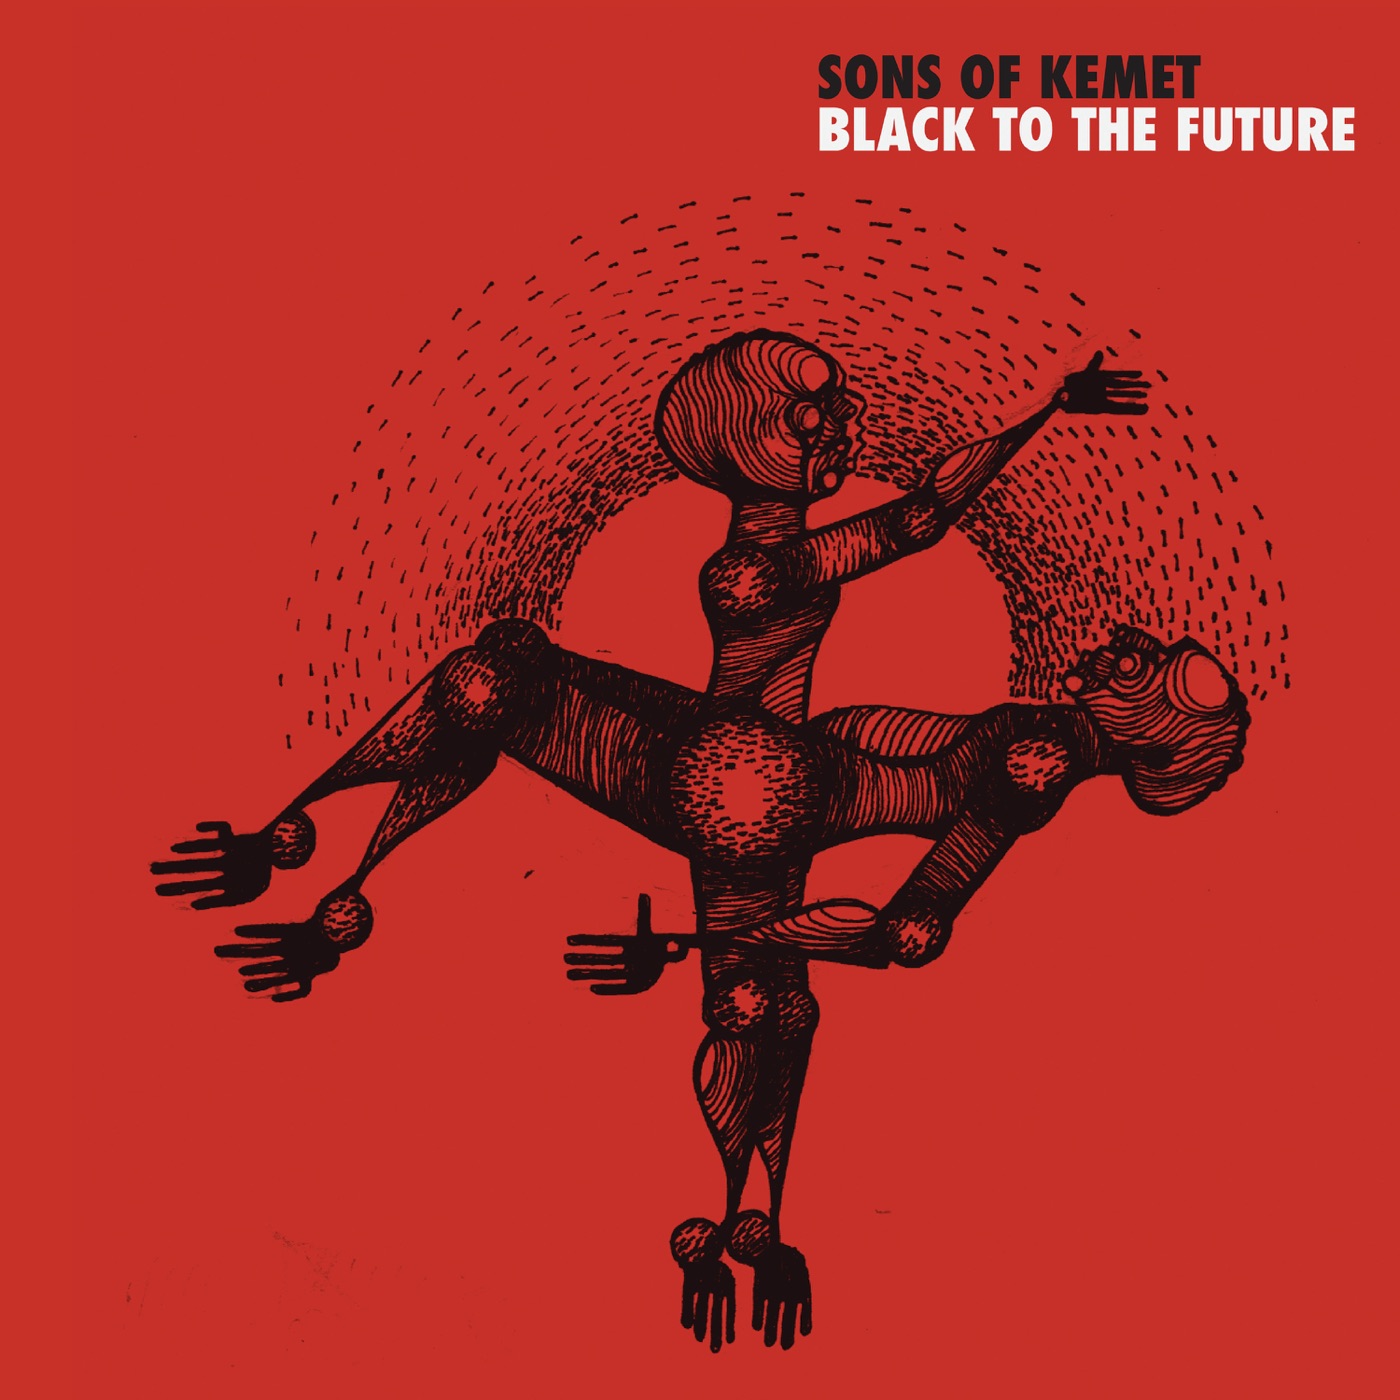 Black To The Future by Sons Of Kemet